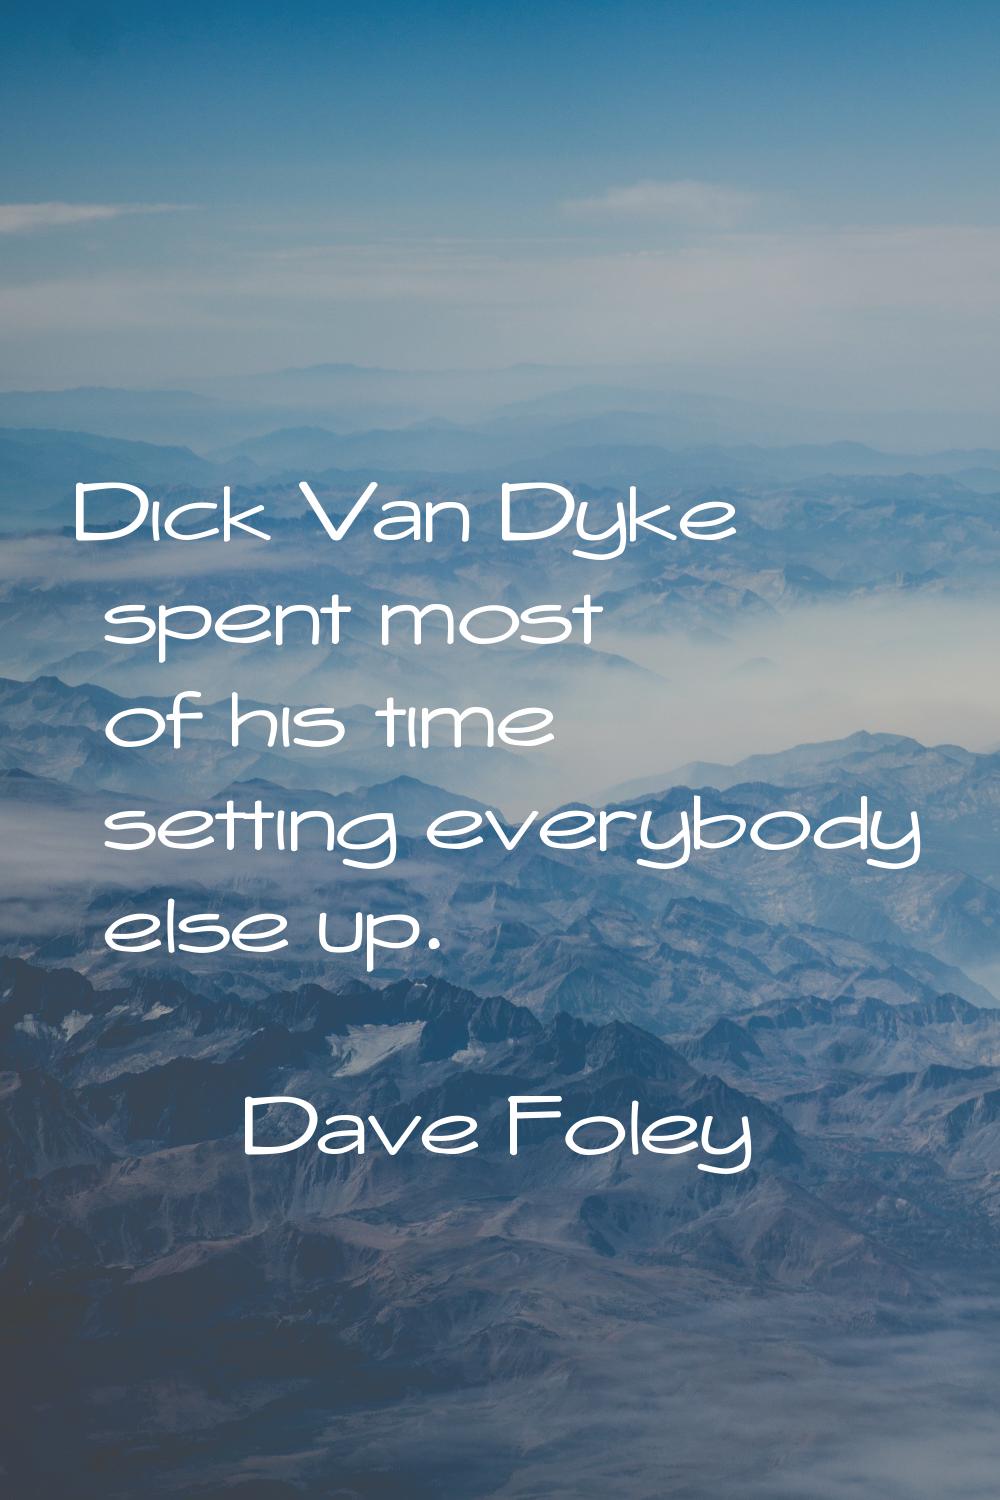 Dick Van Dyke spent most of his time setting everybody else up.